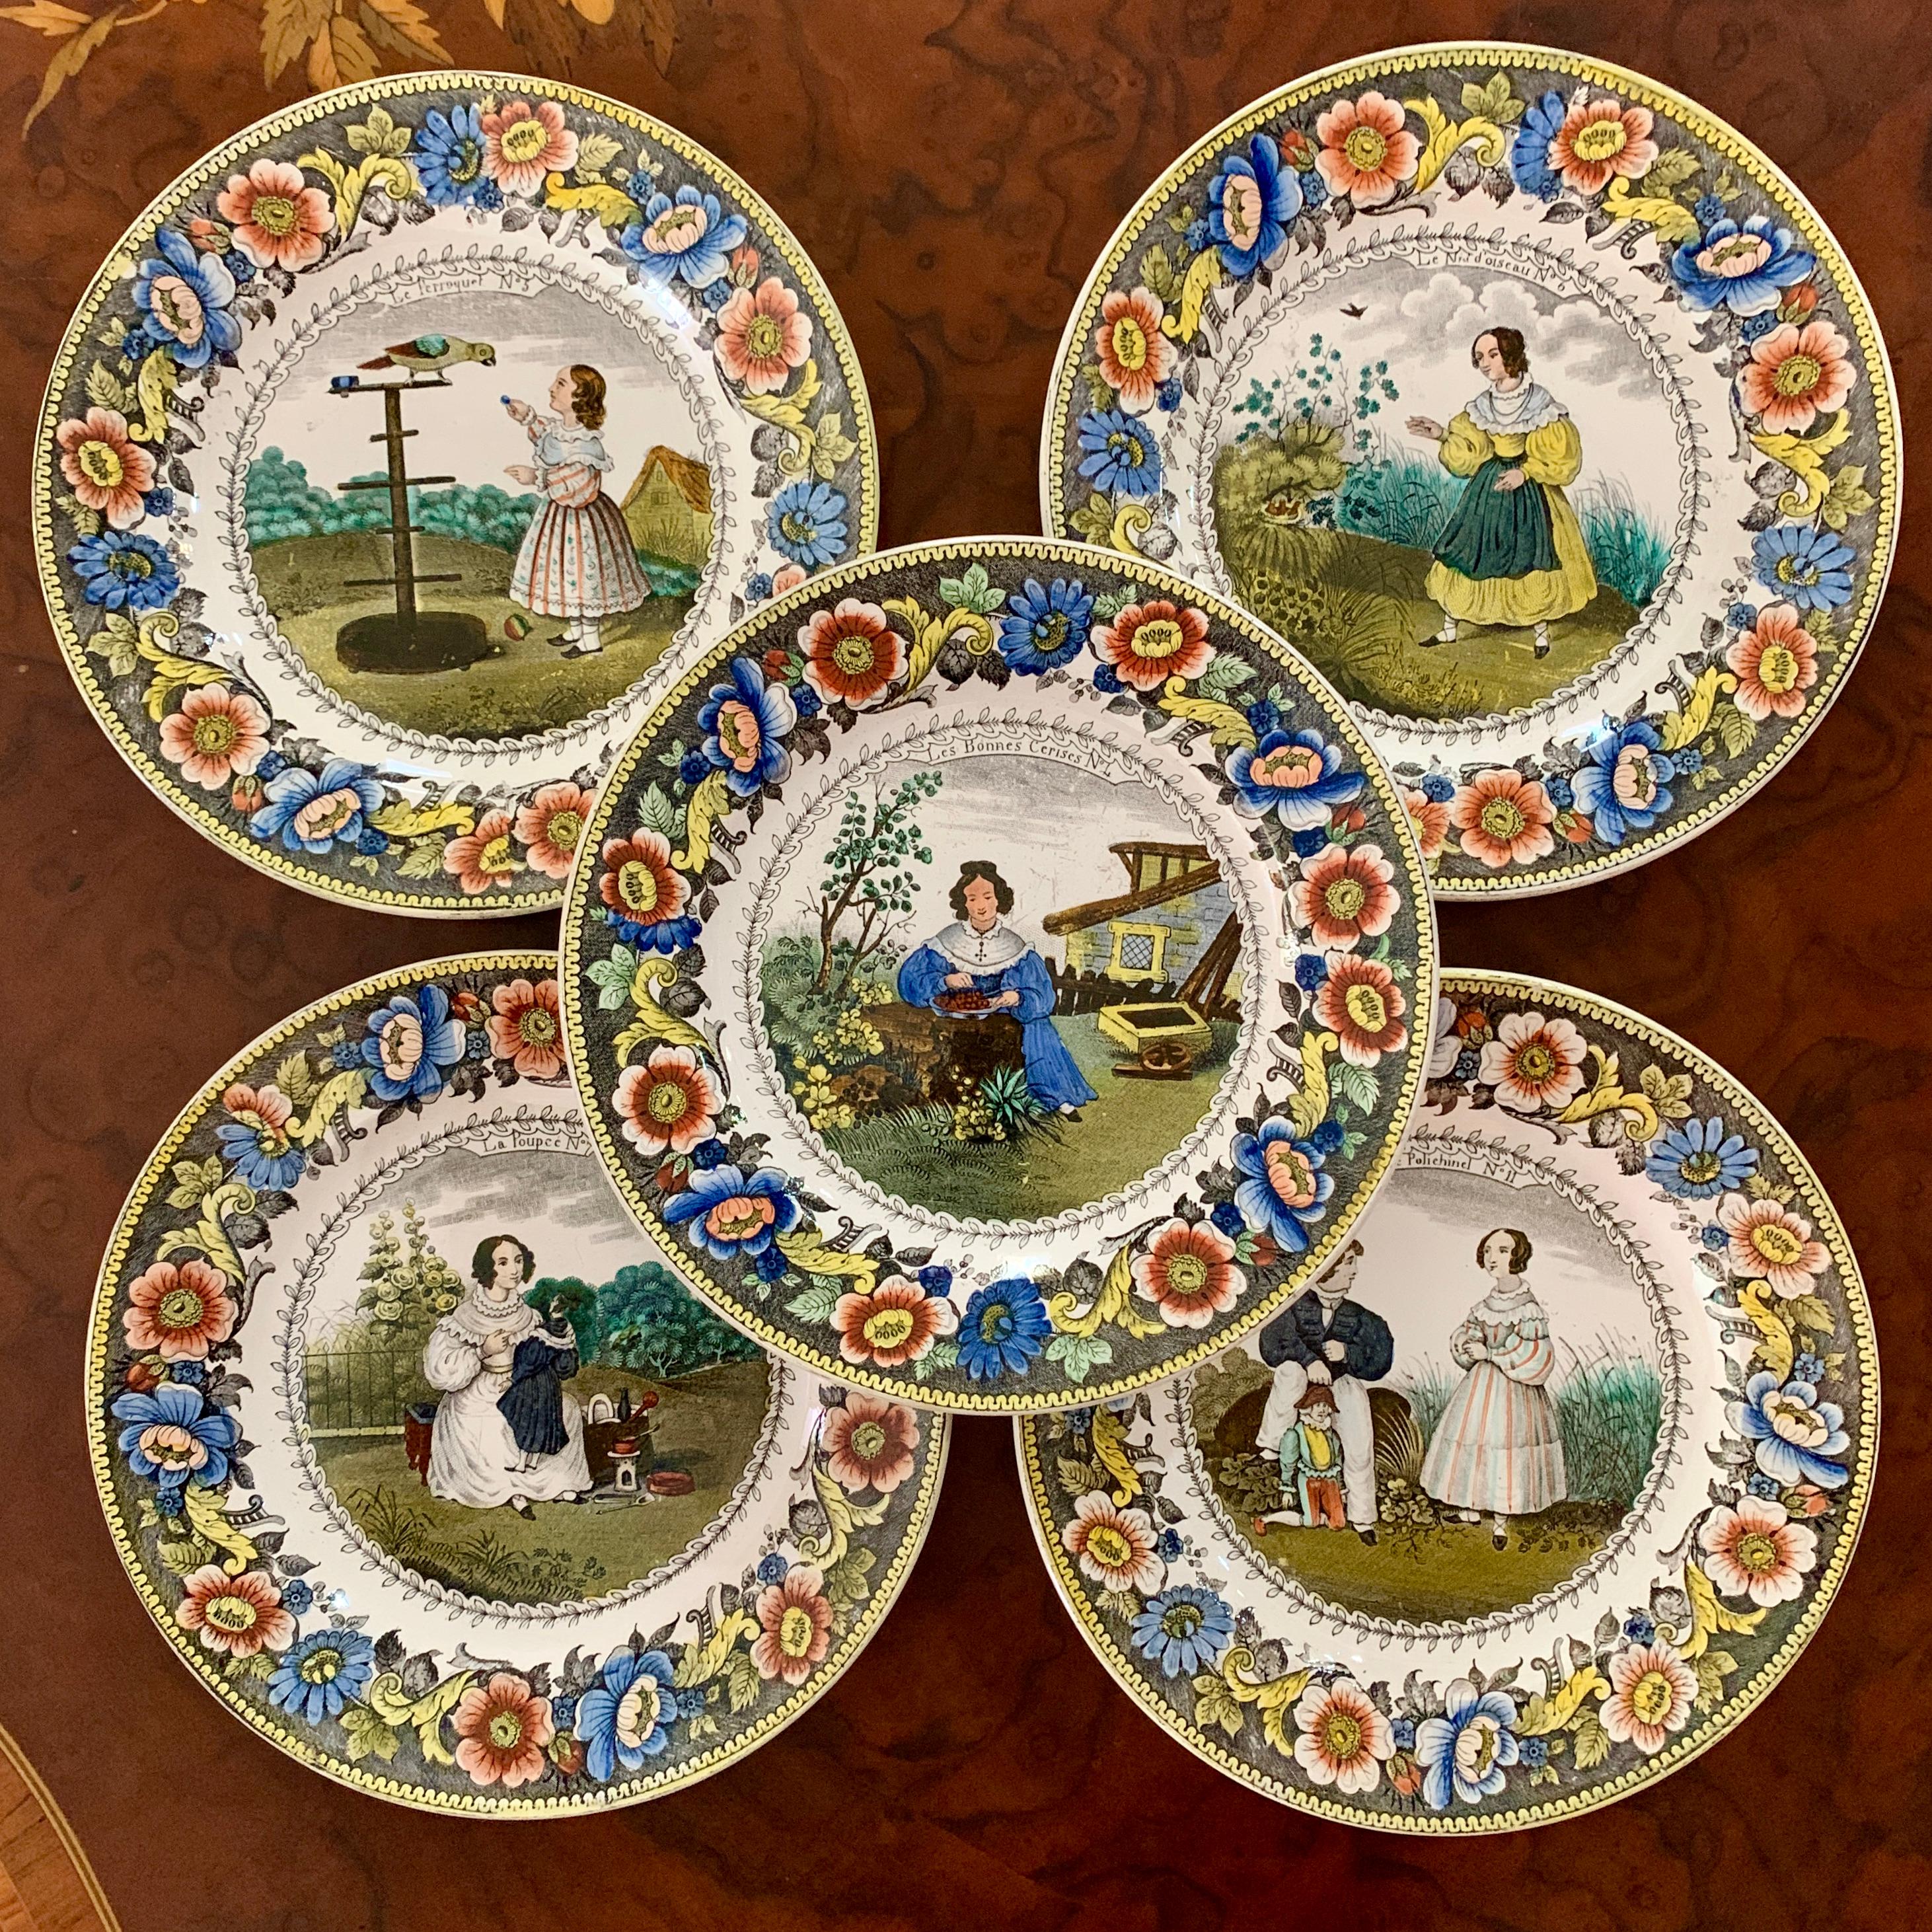 From the Creil region of Northern France, a transfer printed polychrome plate, titled – La Poupeé (the doll) Circa 1830.

The image shows No. 7 from a series of twelve. A young lady in a white period dress, takes a moment from her gardening chores